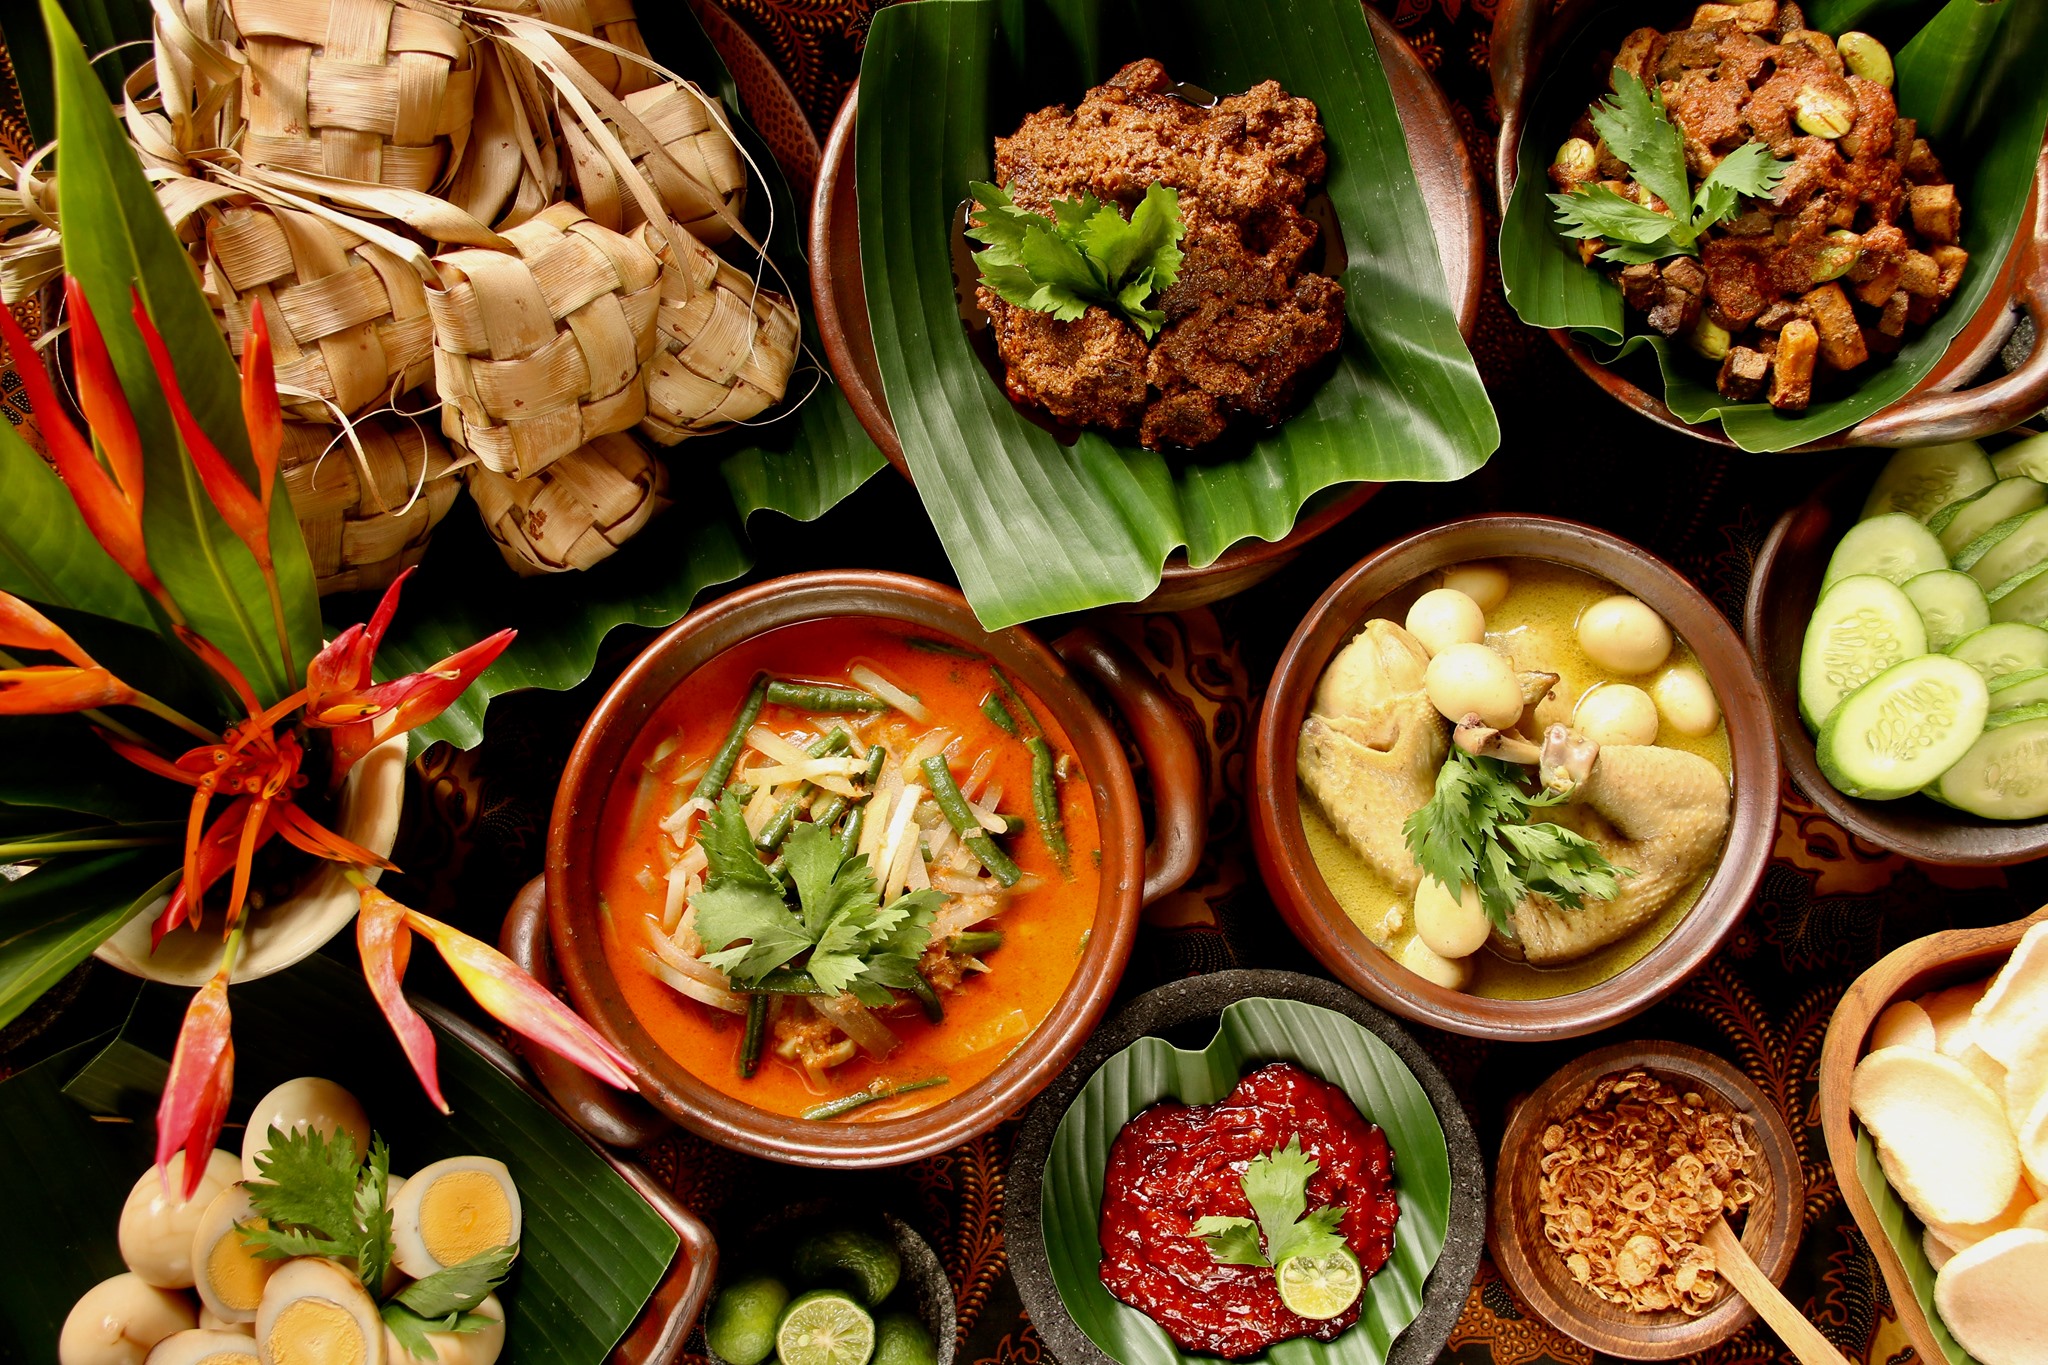 Indonesian Food Festival - City Nomads